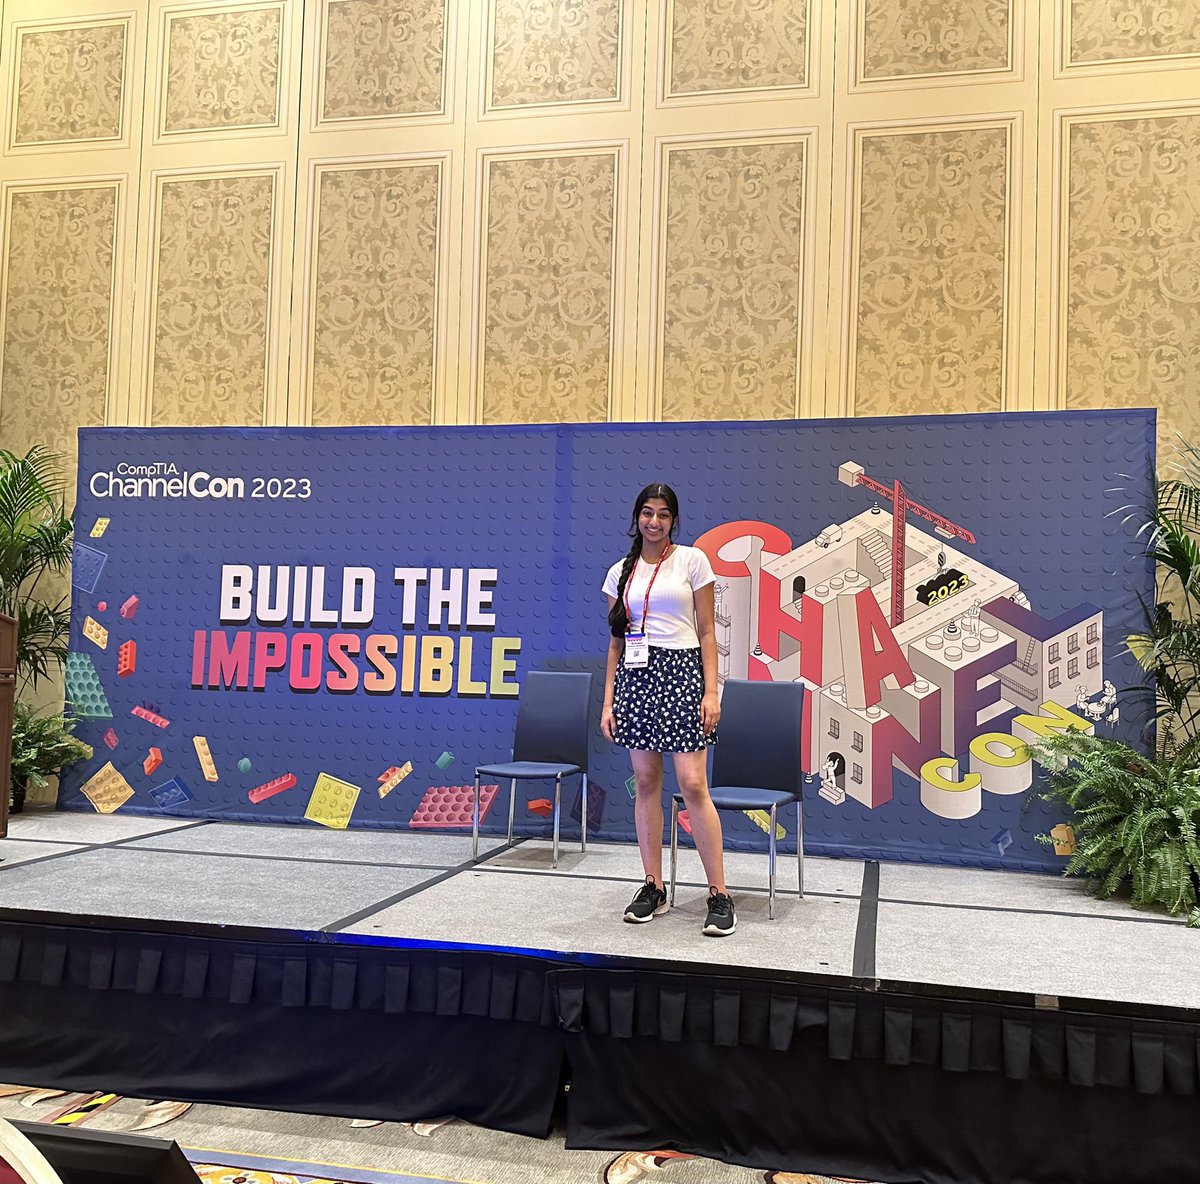 Thank you @CompTIAConnect for inviting me over for ChannelCon and having me speak as the Cecilia galvin scholarship winner! What an awesome experience and I was so inspired by comptia’s
Dedication to innovation in the tech field!